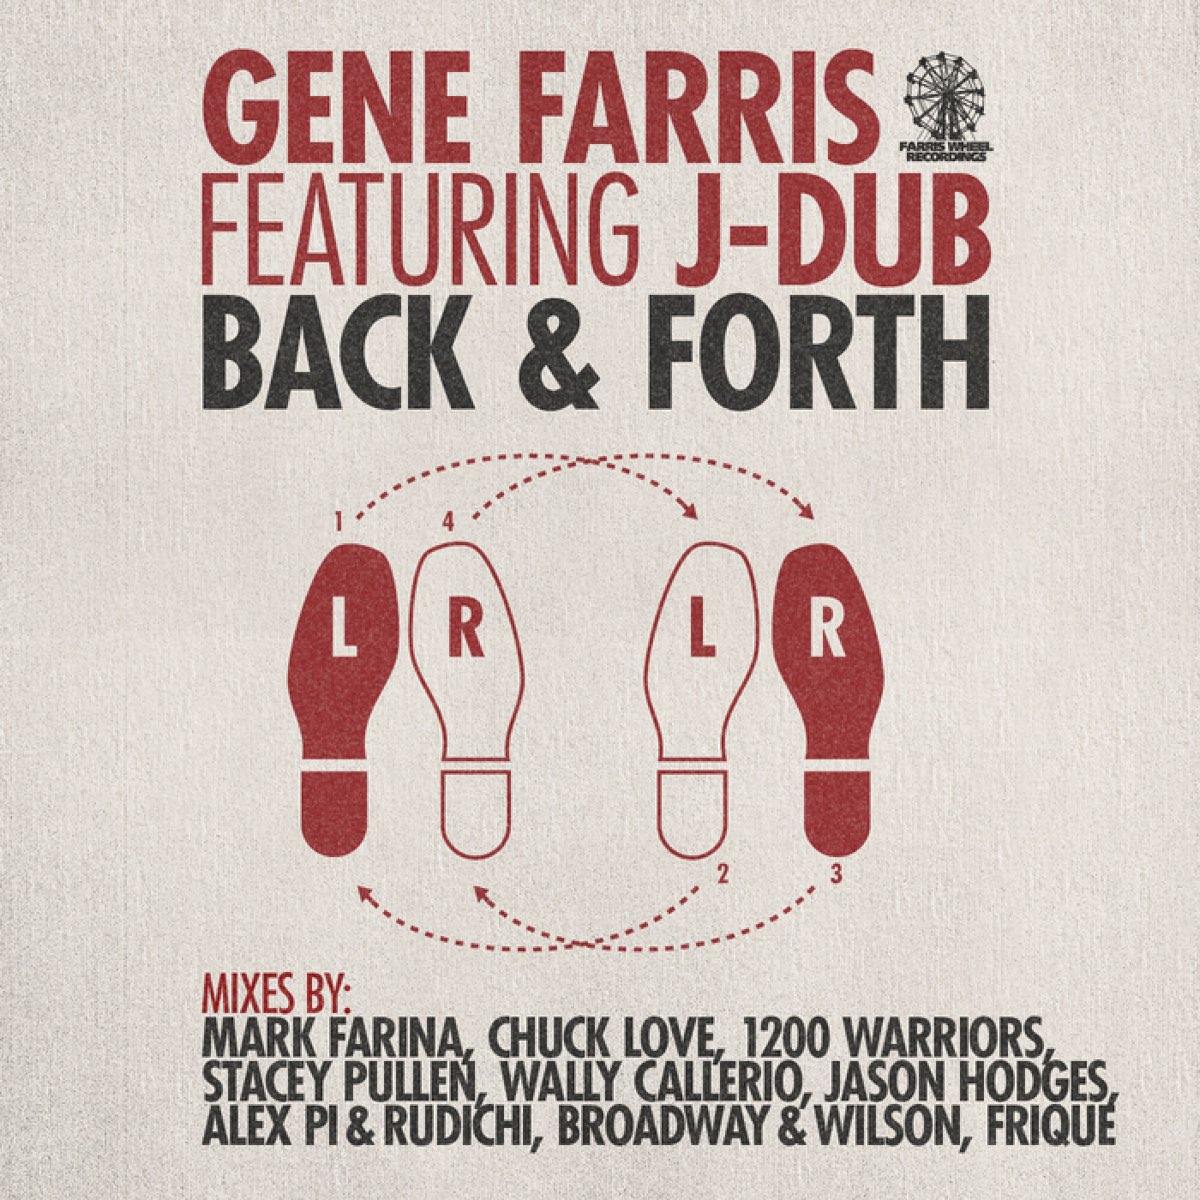 Back and forth. Forth back back forth. Gene Farris. Обои Twins Edge back and forth.